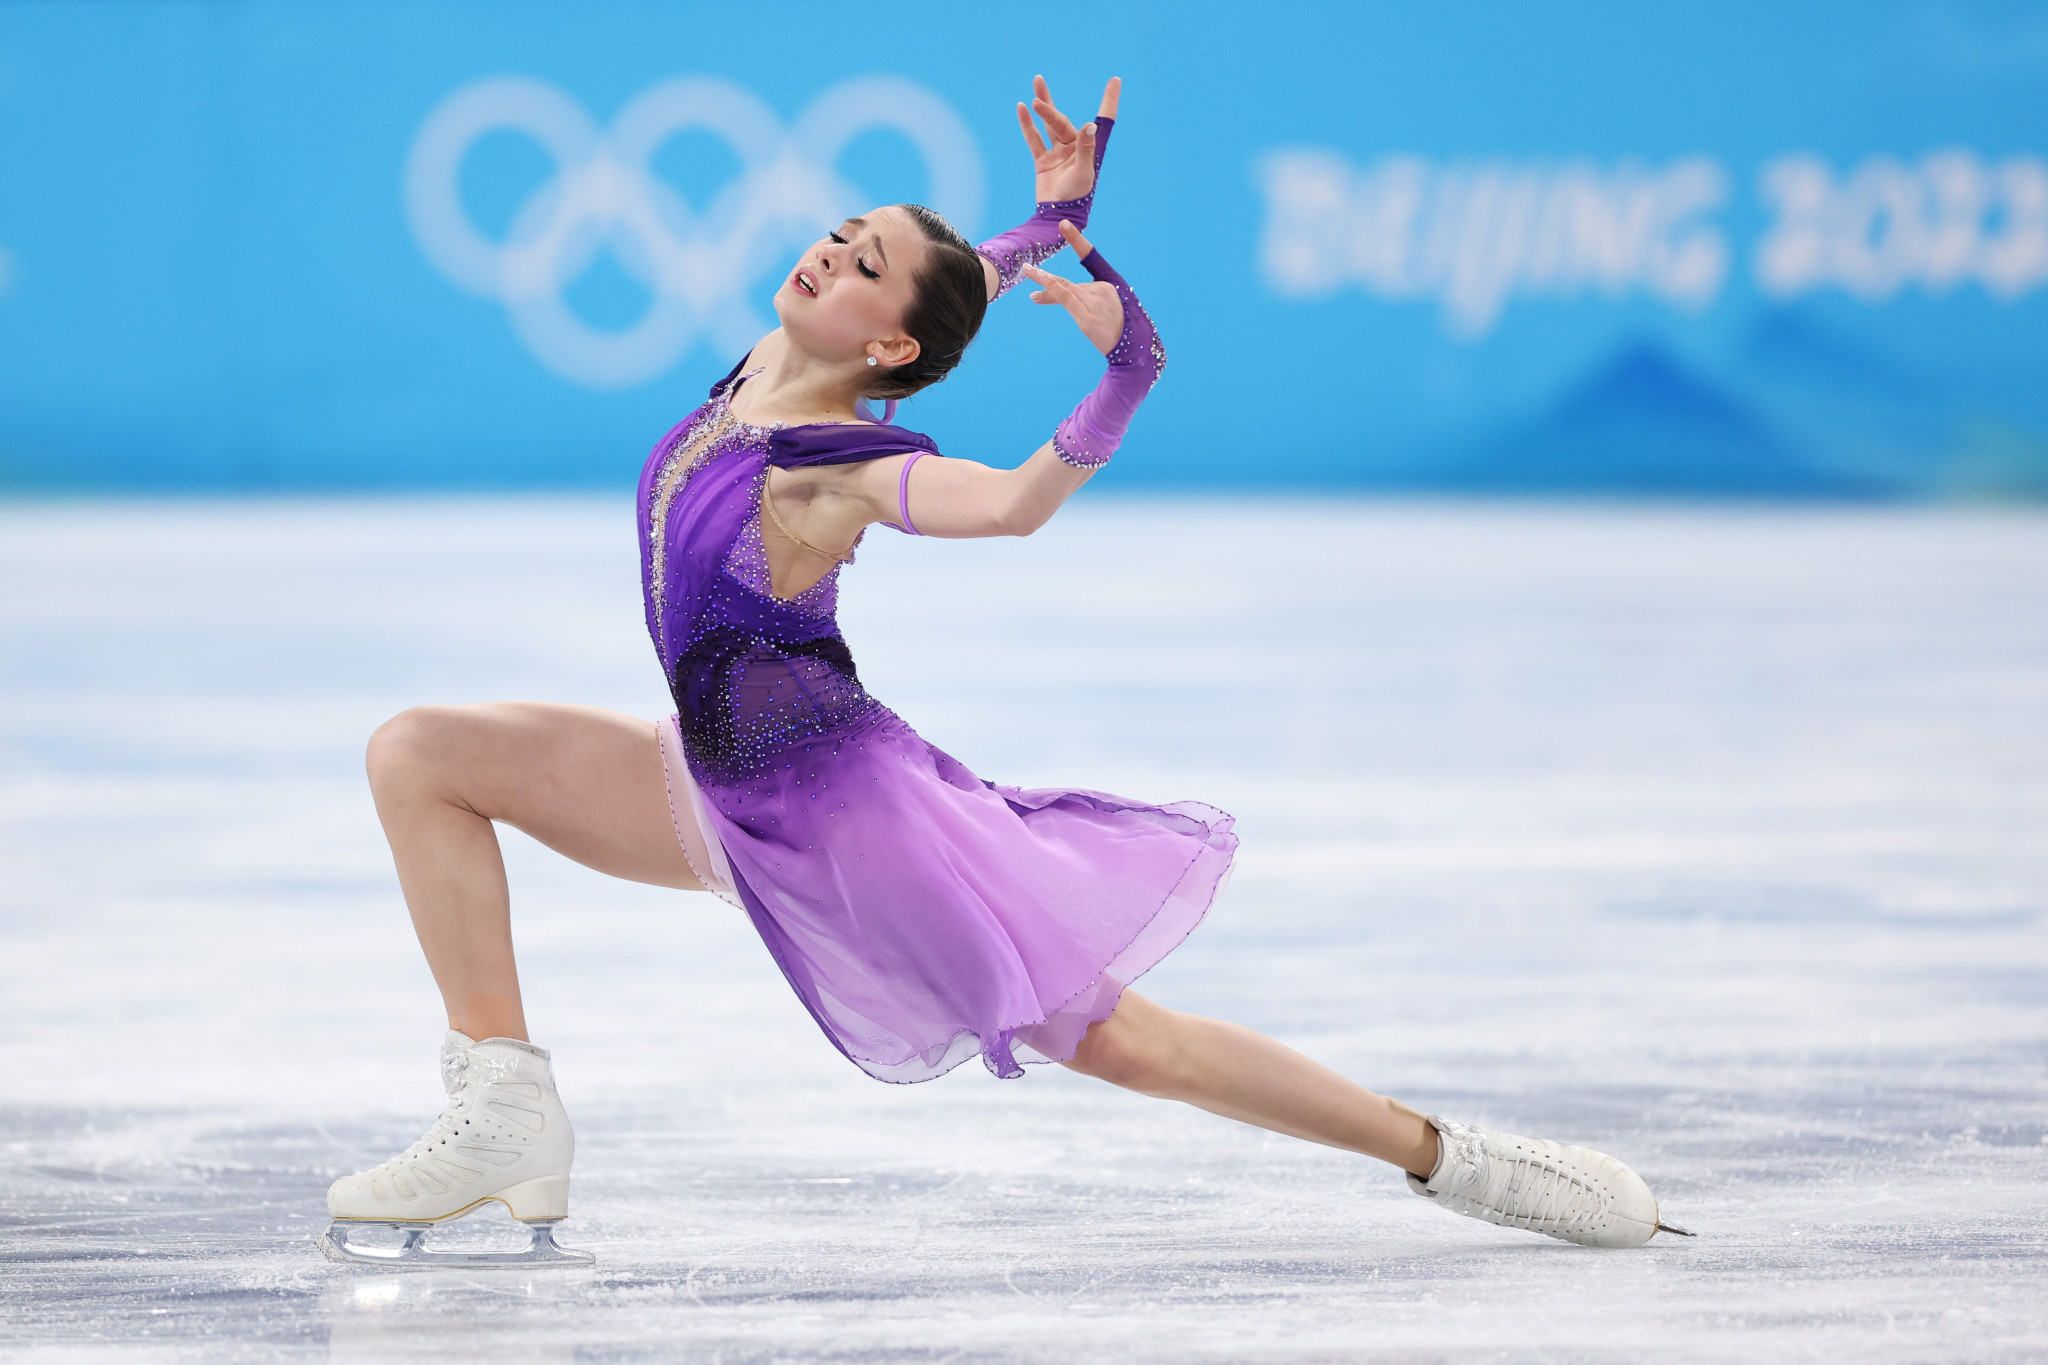 RUSADA's investigation into figure skater Kamila Valieva's positive sample has reached its "final stage" ©Getty Images